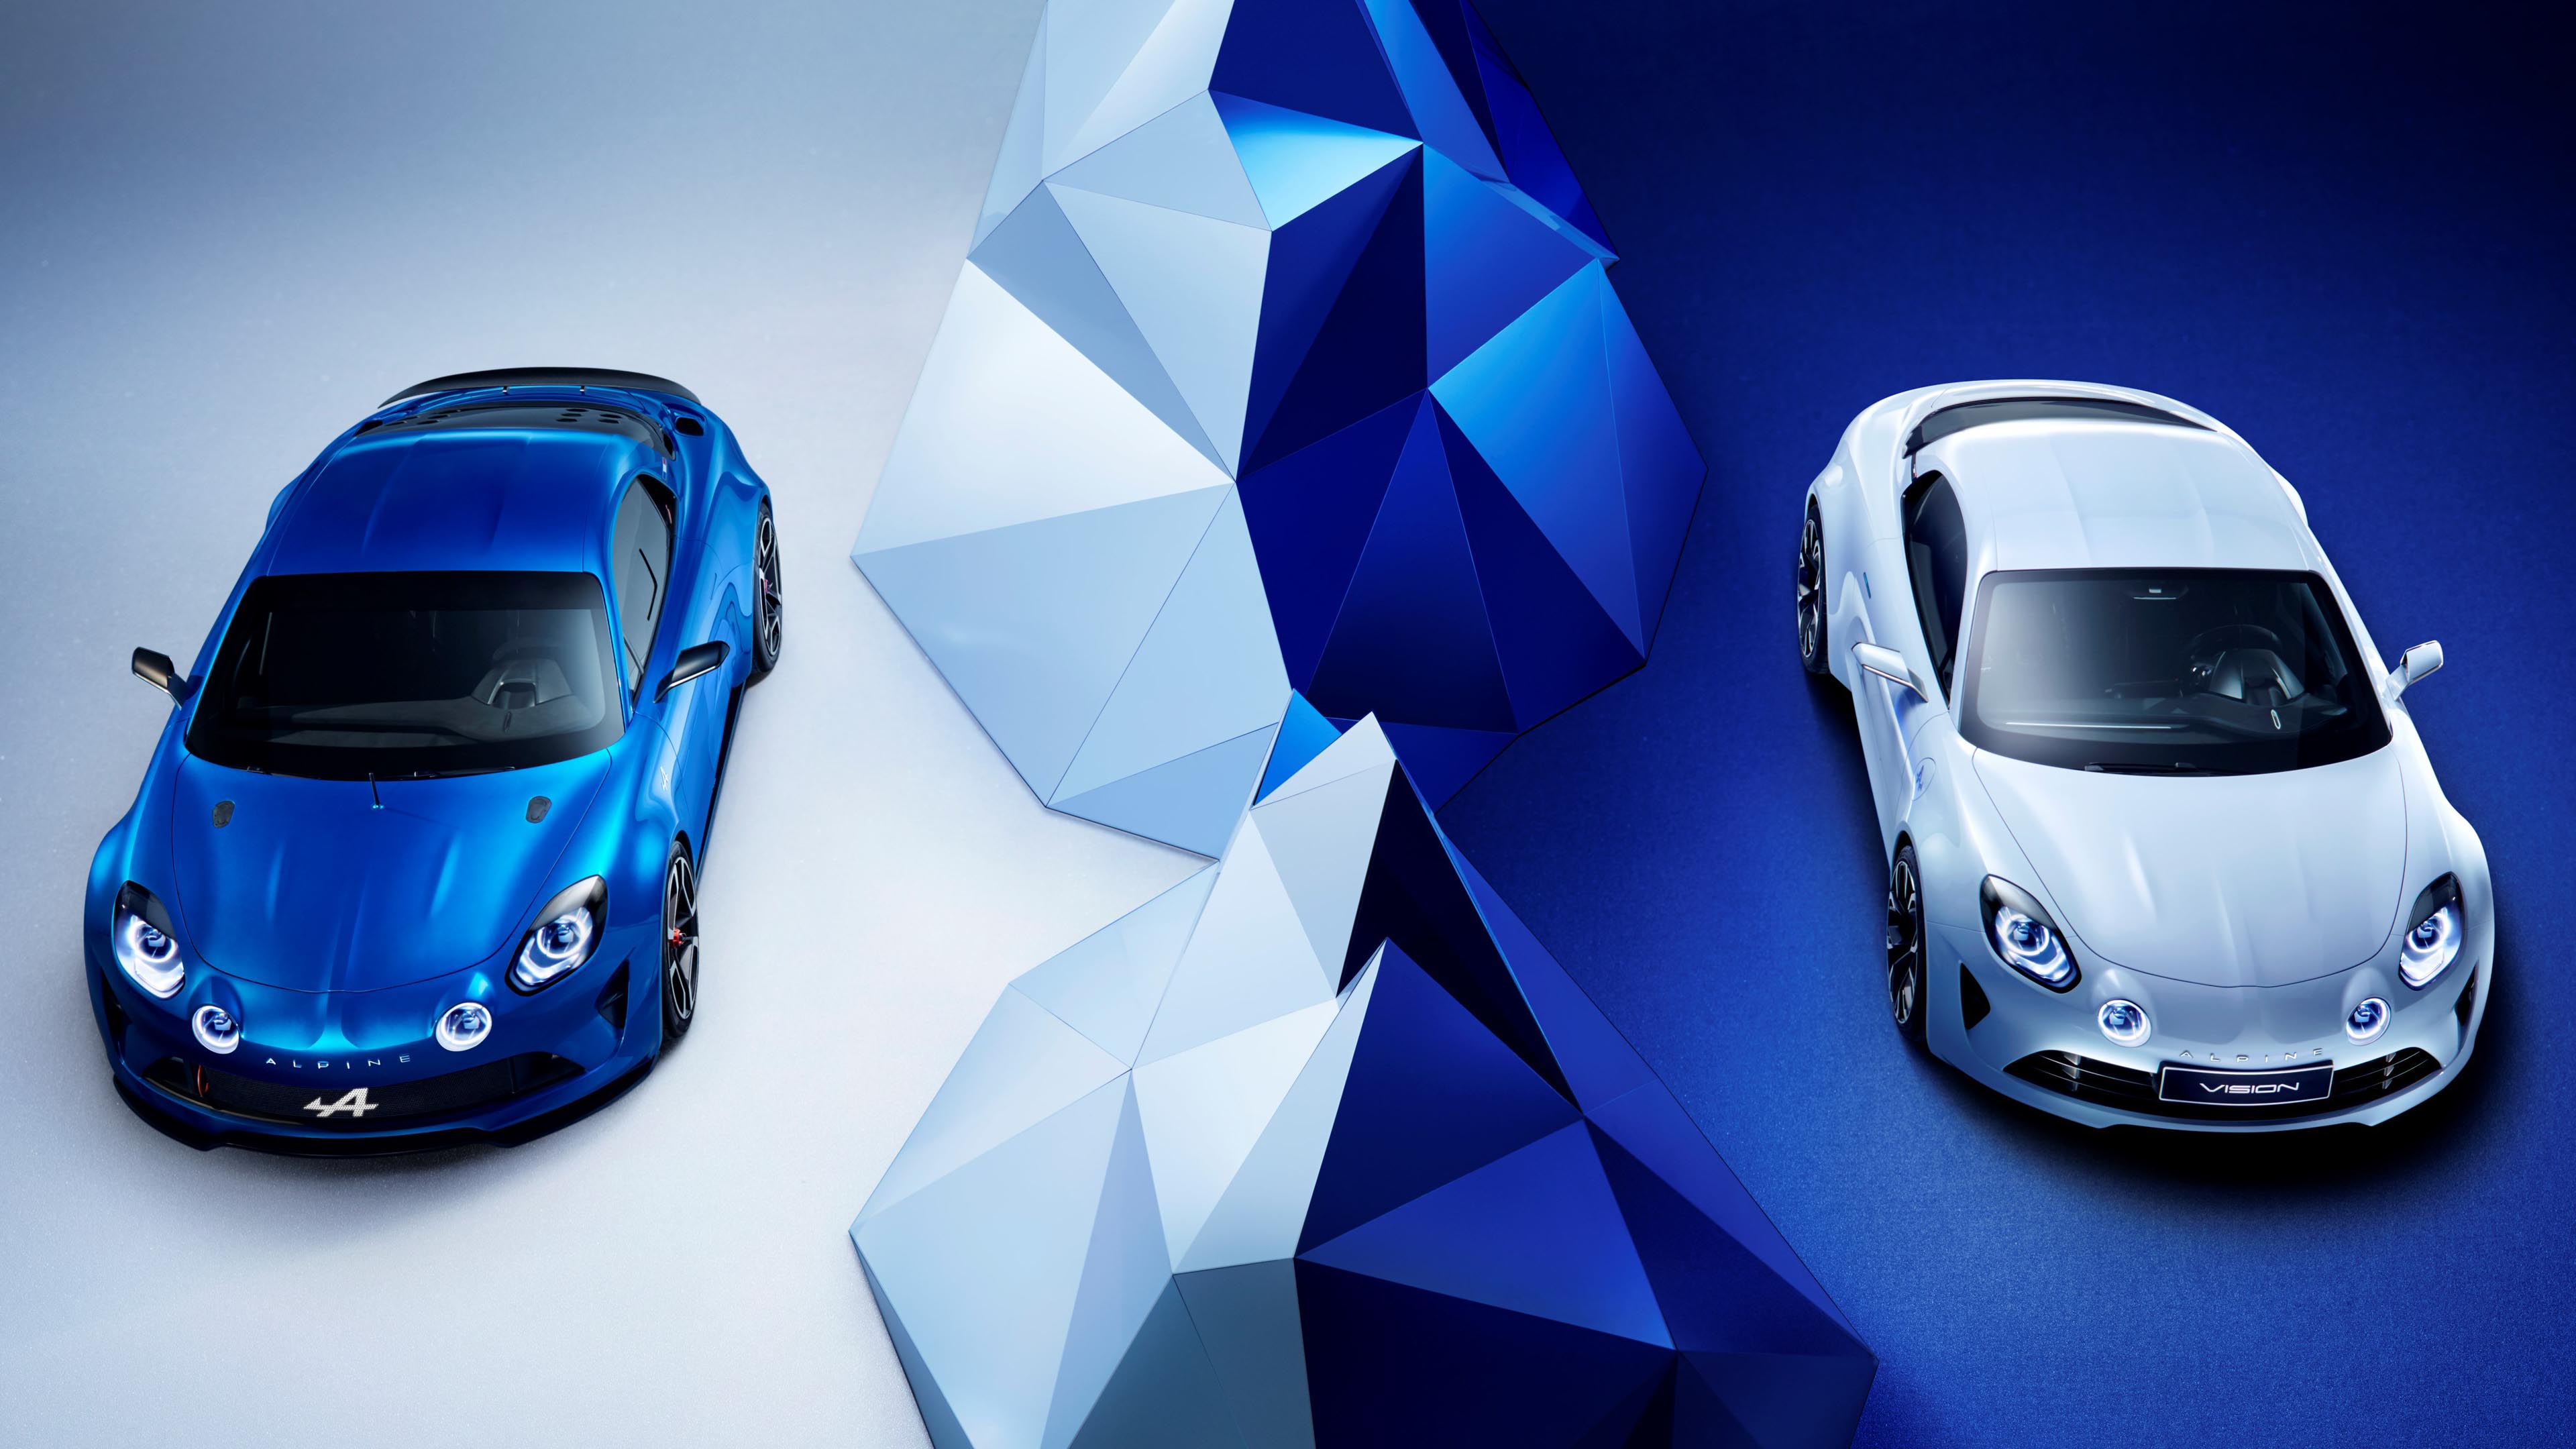 2 Alpine Vision concepts side by side